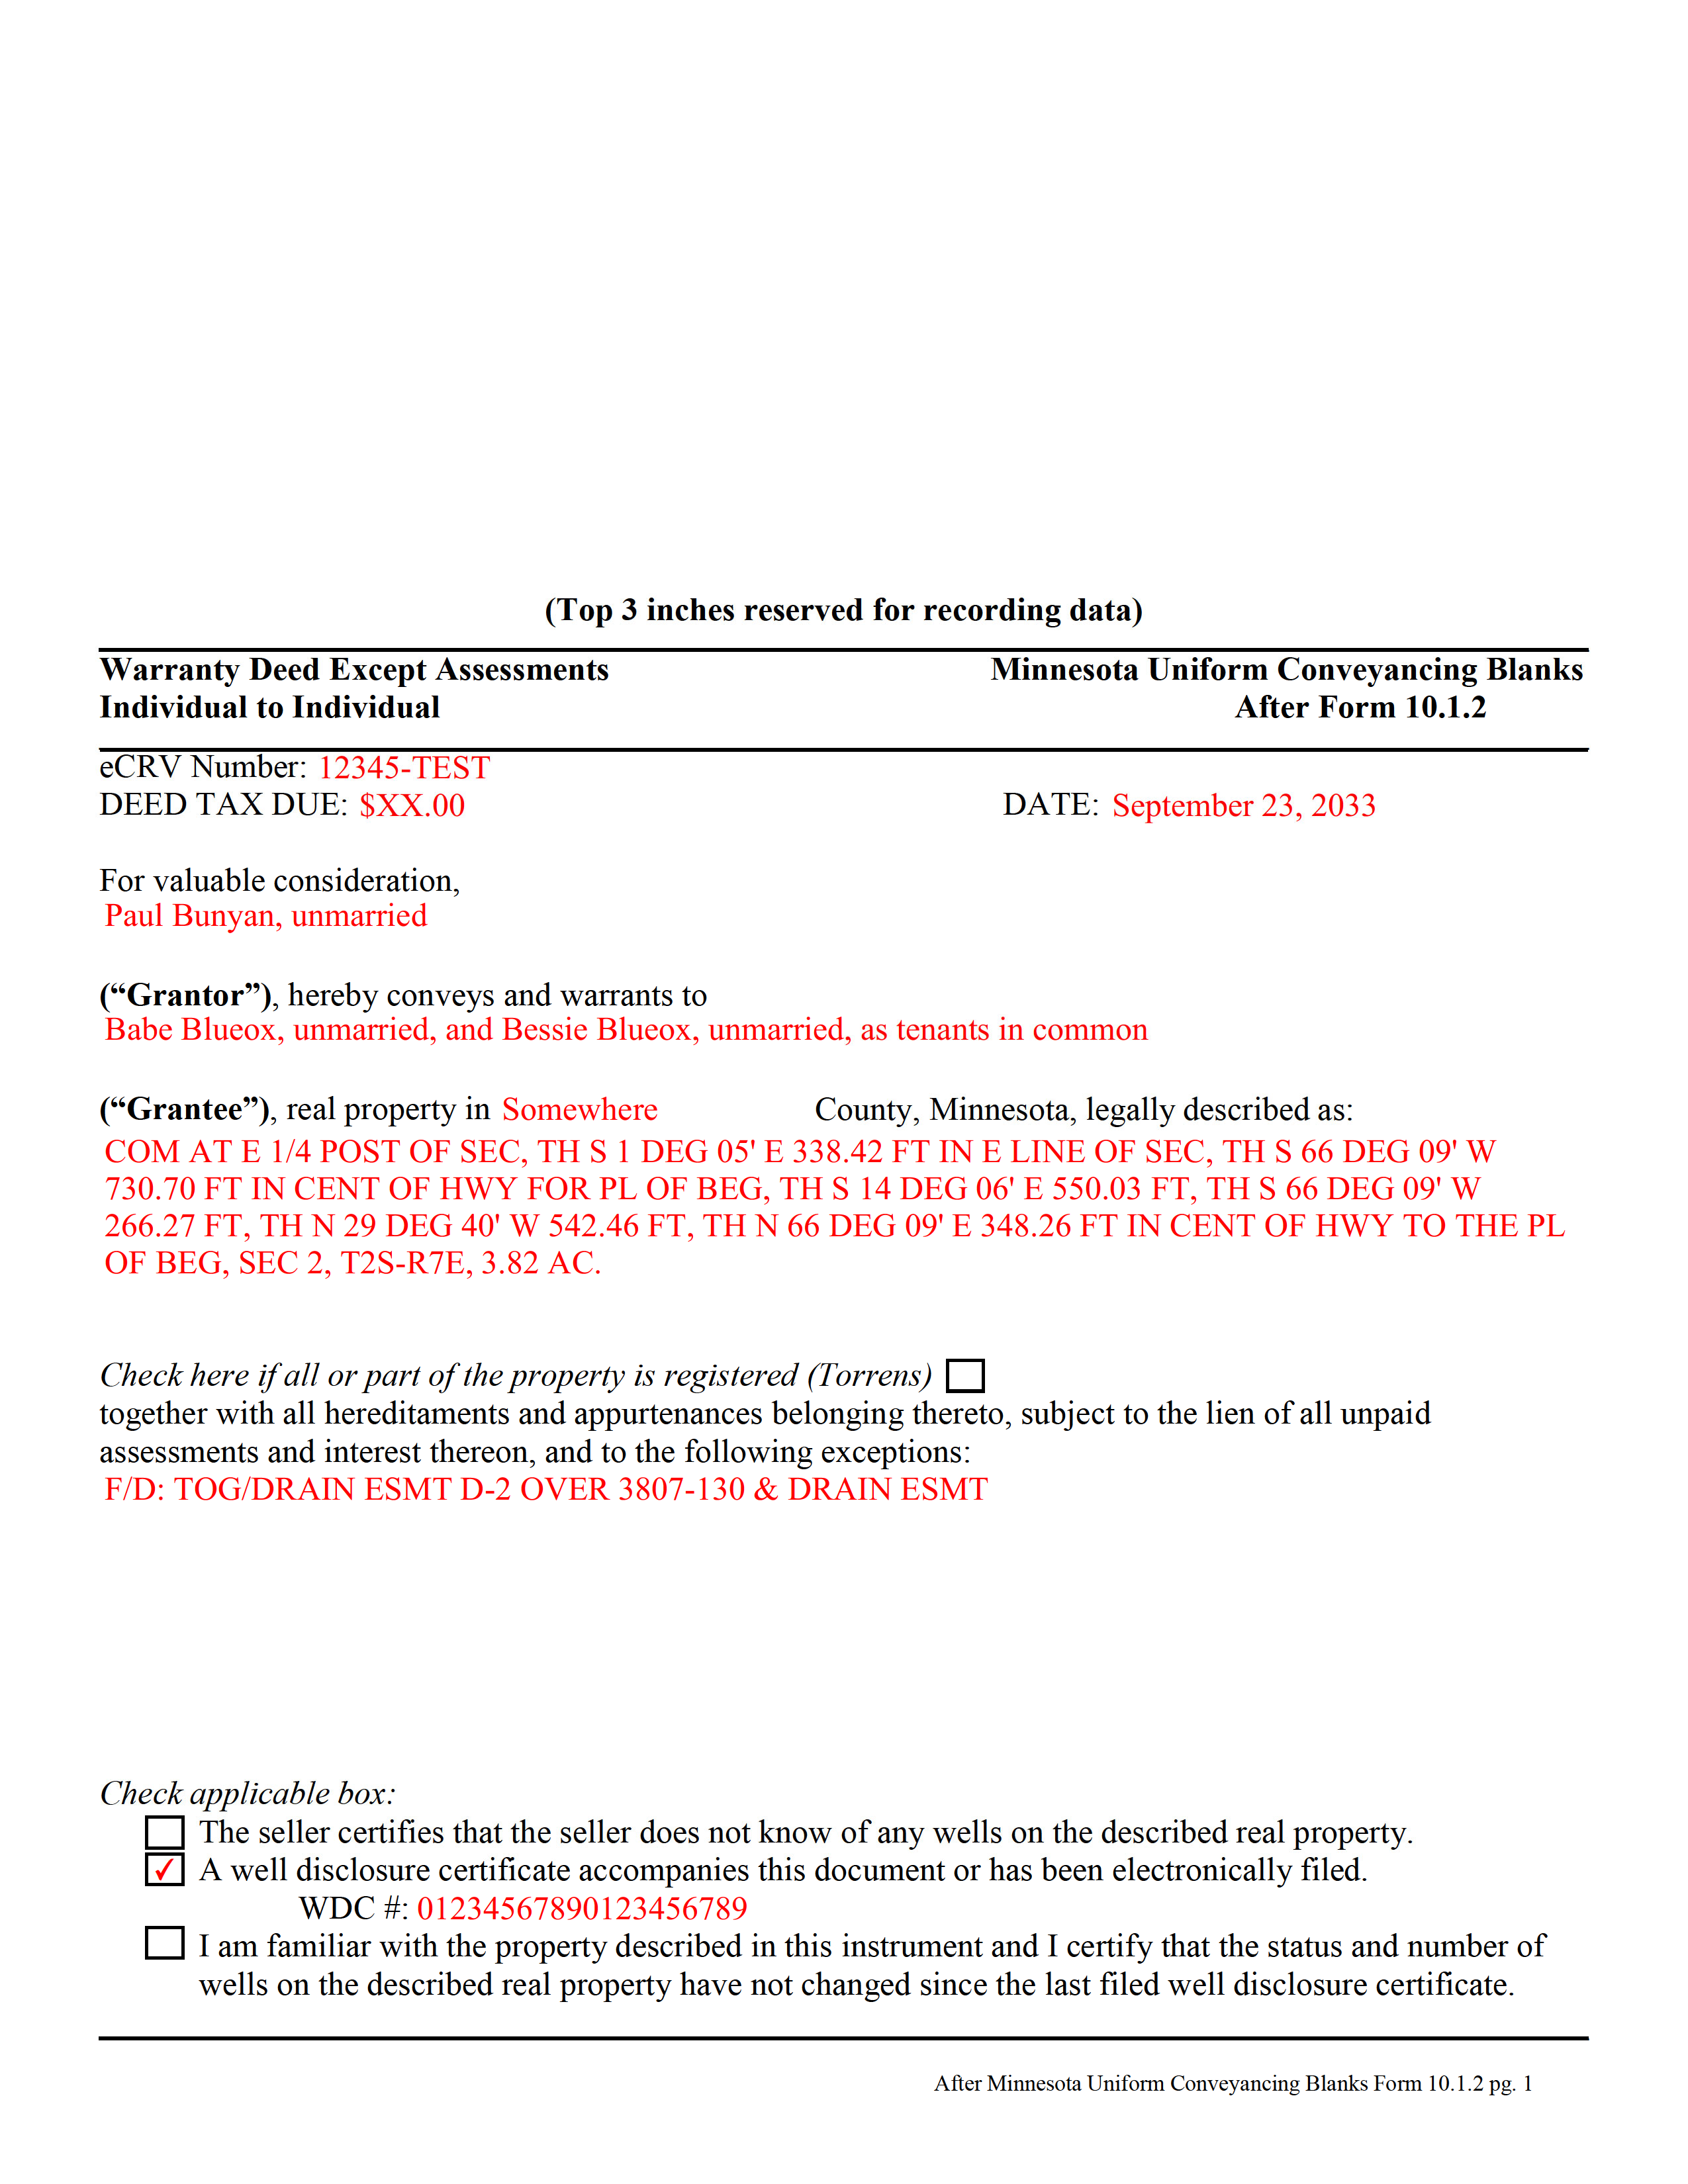 Completed Example of the Warranty Deed Excluding Assessment Document